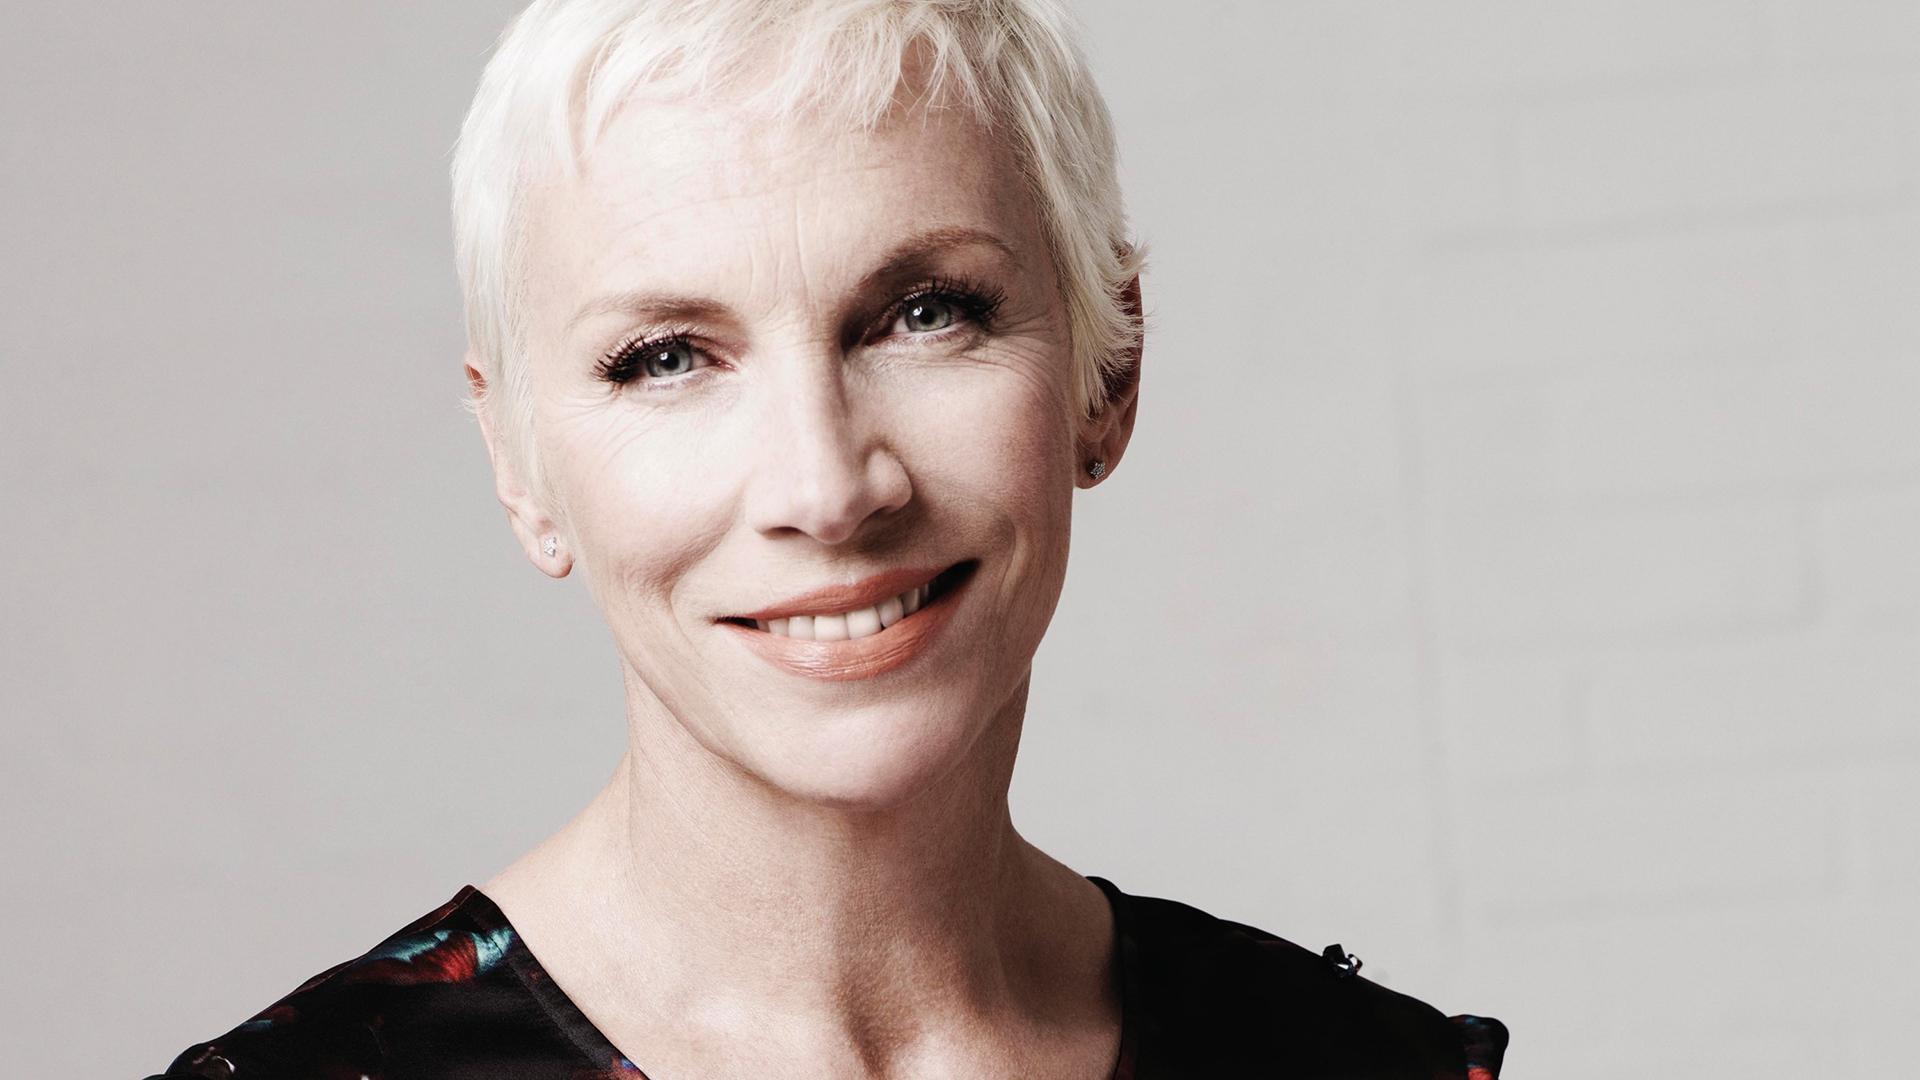 Annie Lennox Wallpaper Image Photo Picture Background